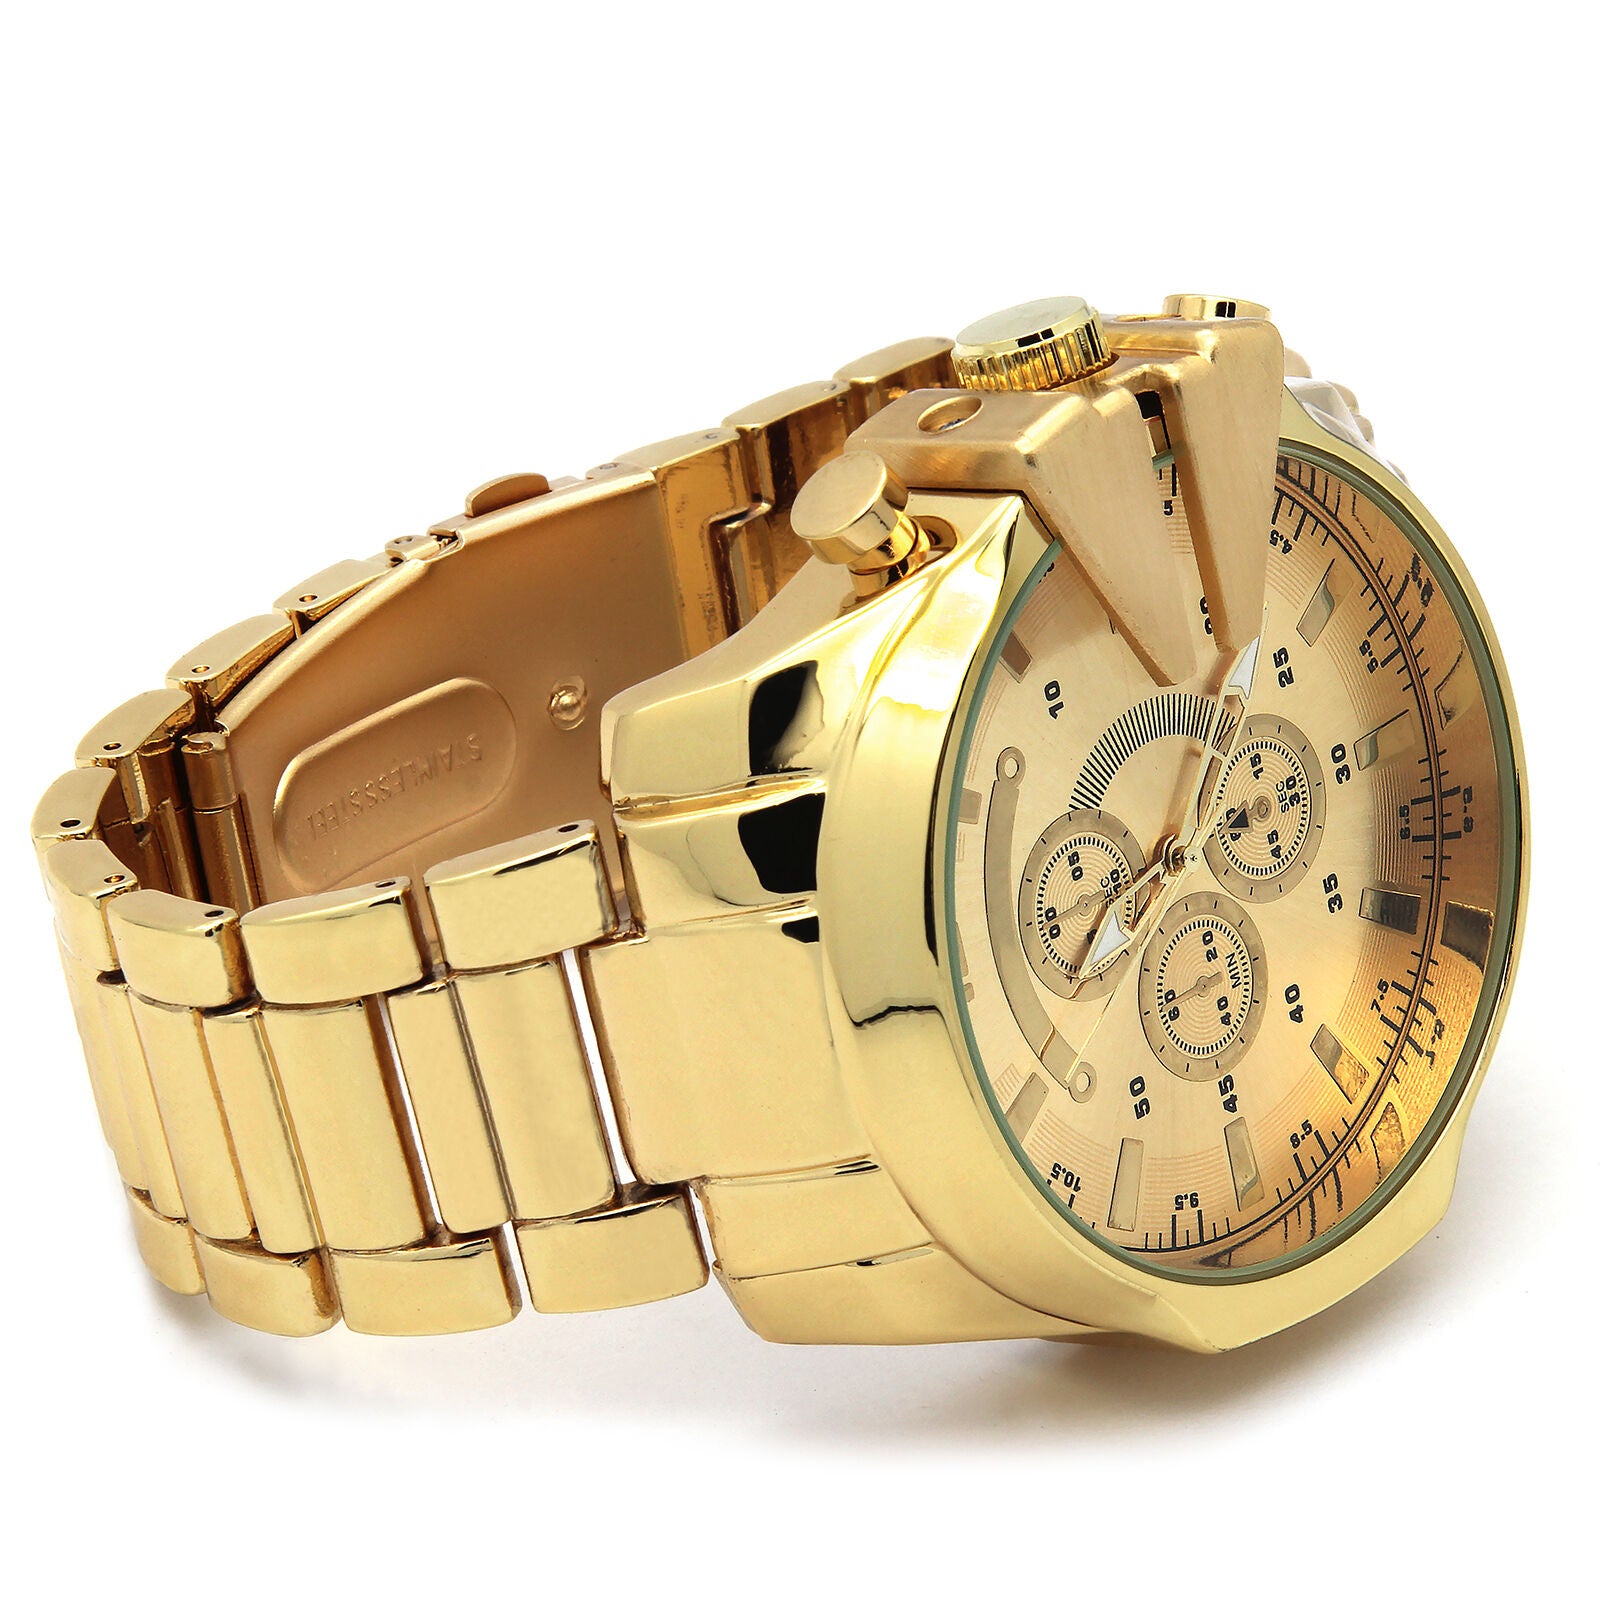 Gold Invicta Style Metal Band Watch